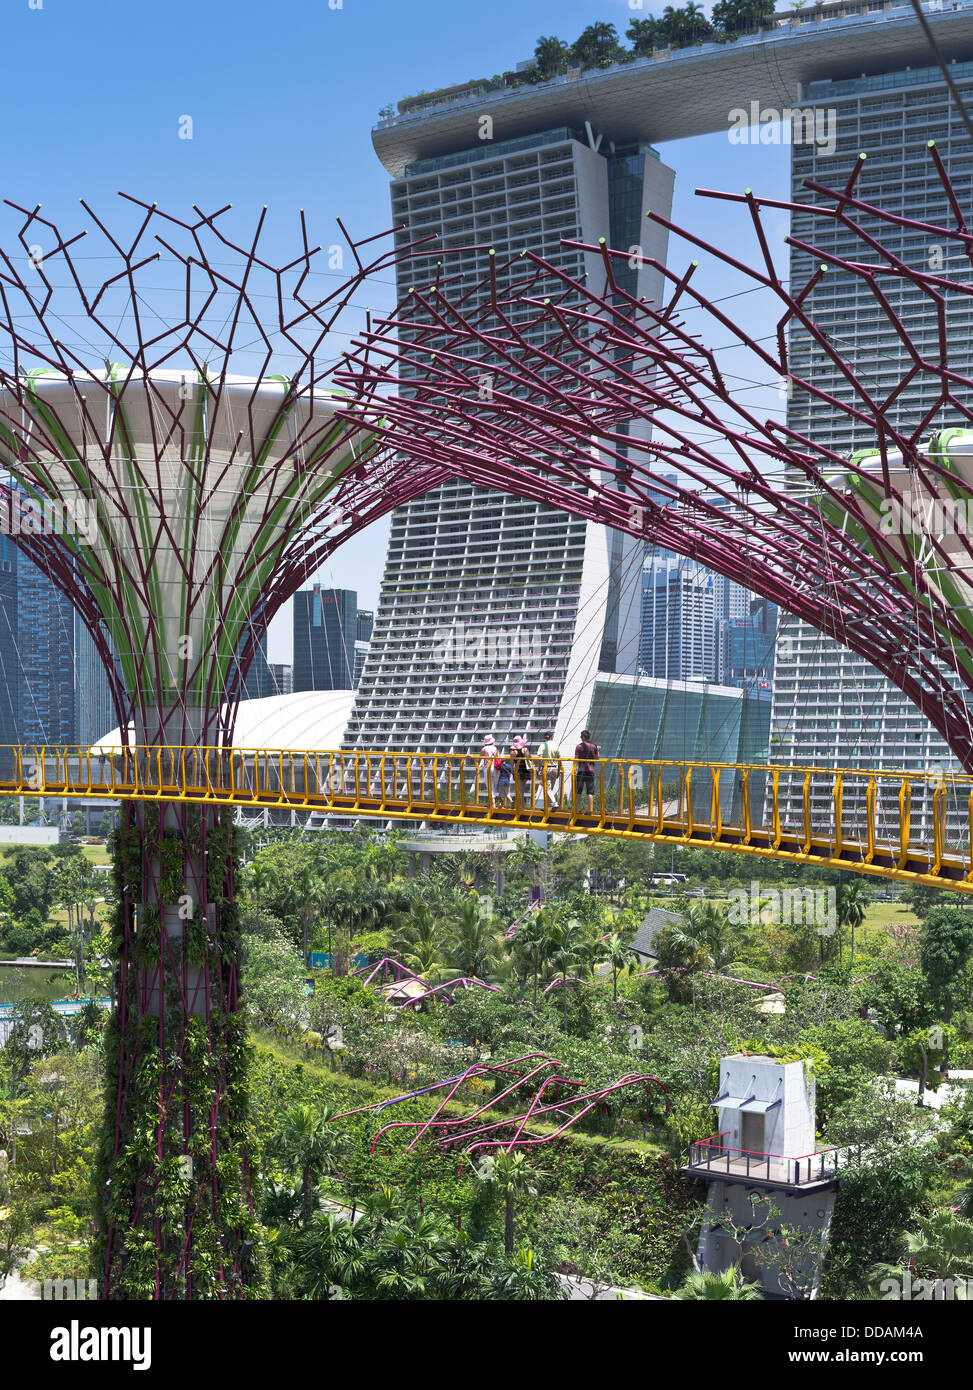 dh Supertree Grove skyway GARDENS BY THE BAY SINGAPORE Supertrees vertical gardens people walking elevated walkway trees sky garden Stock Photo